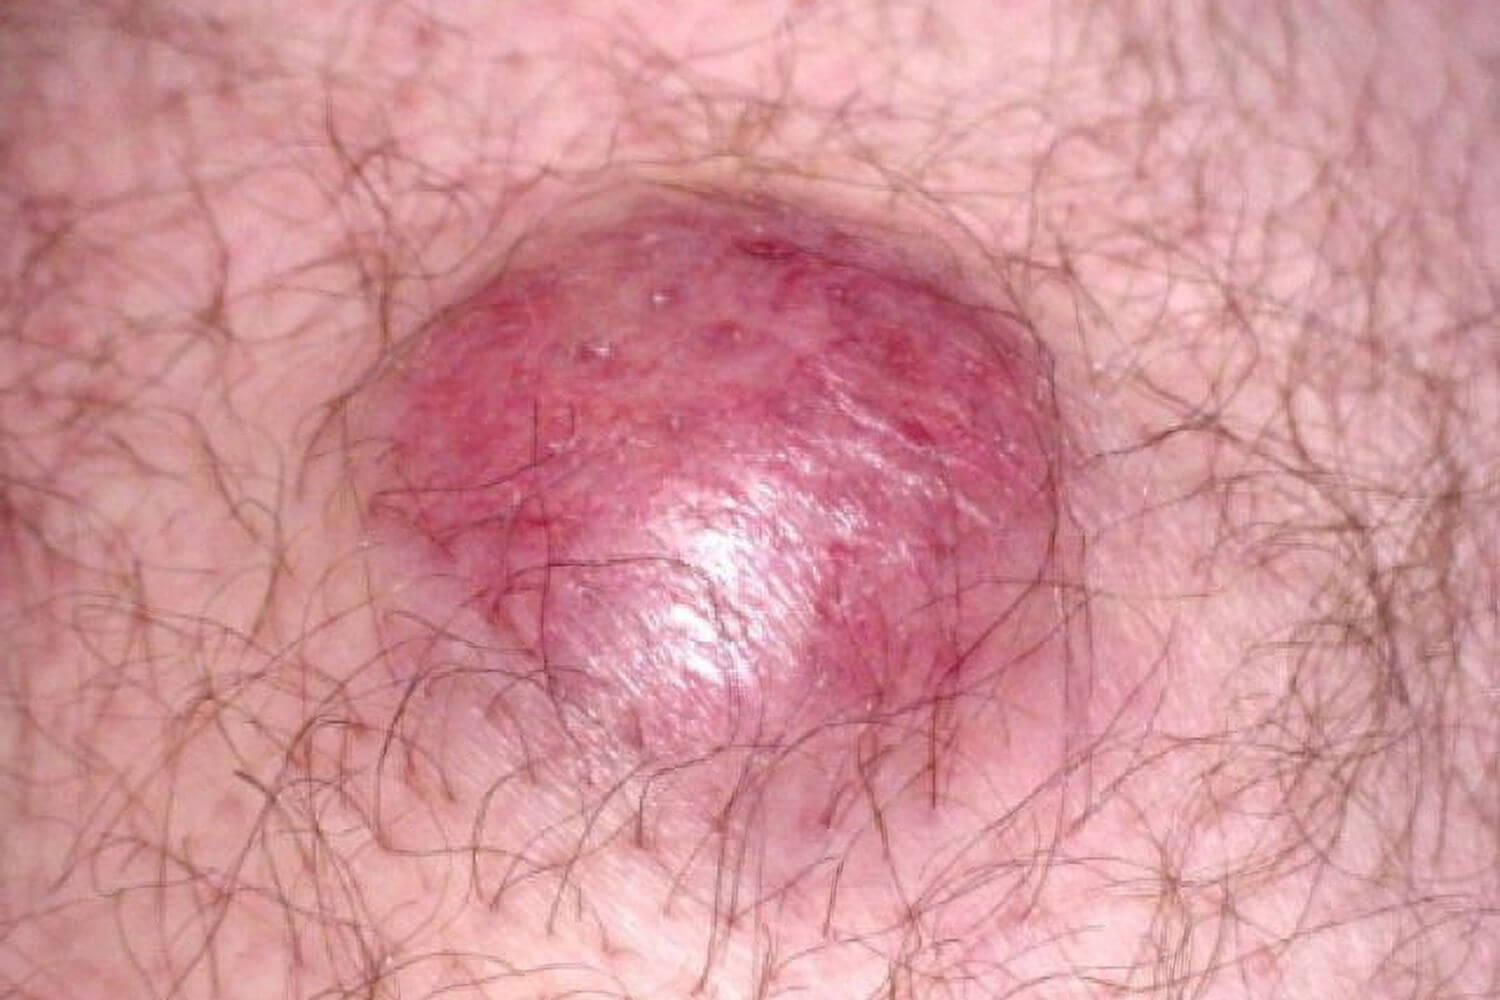 Merkel cell carcinoma is an aggressive form of skin cancer with a high mortality rate. Learn more about diagnosis and treatment options here.